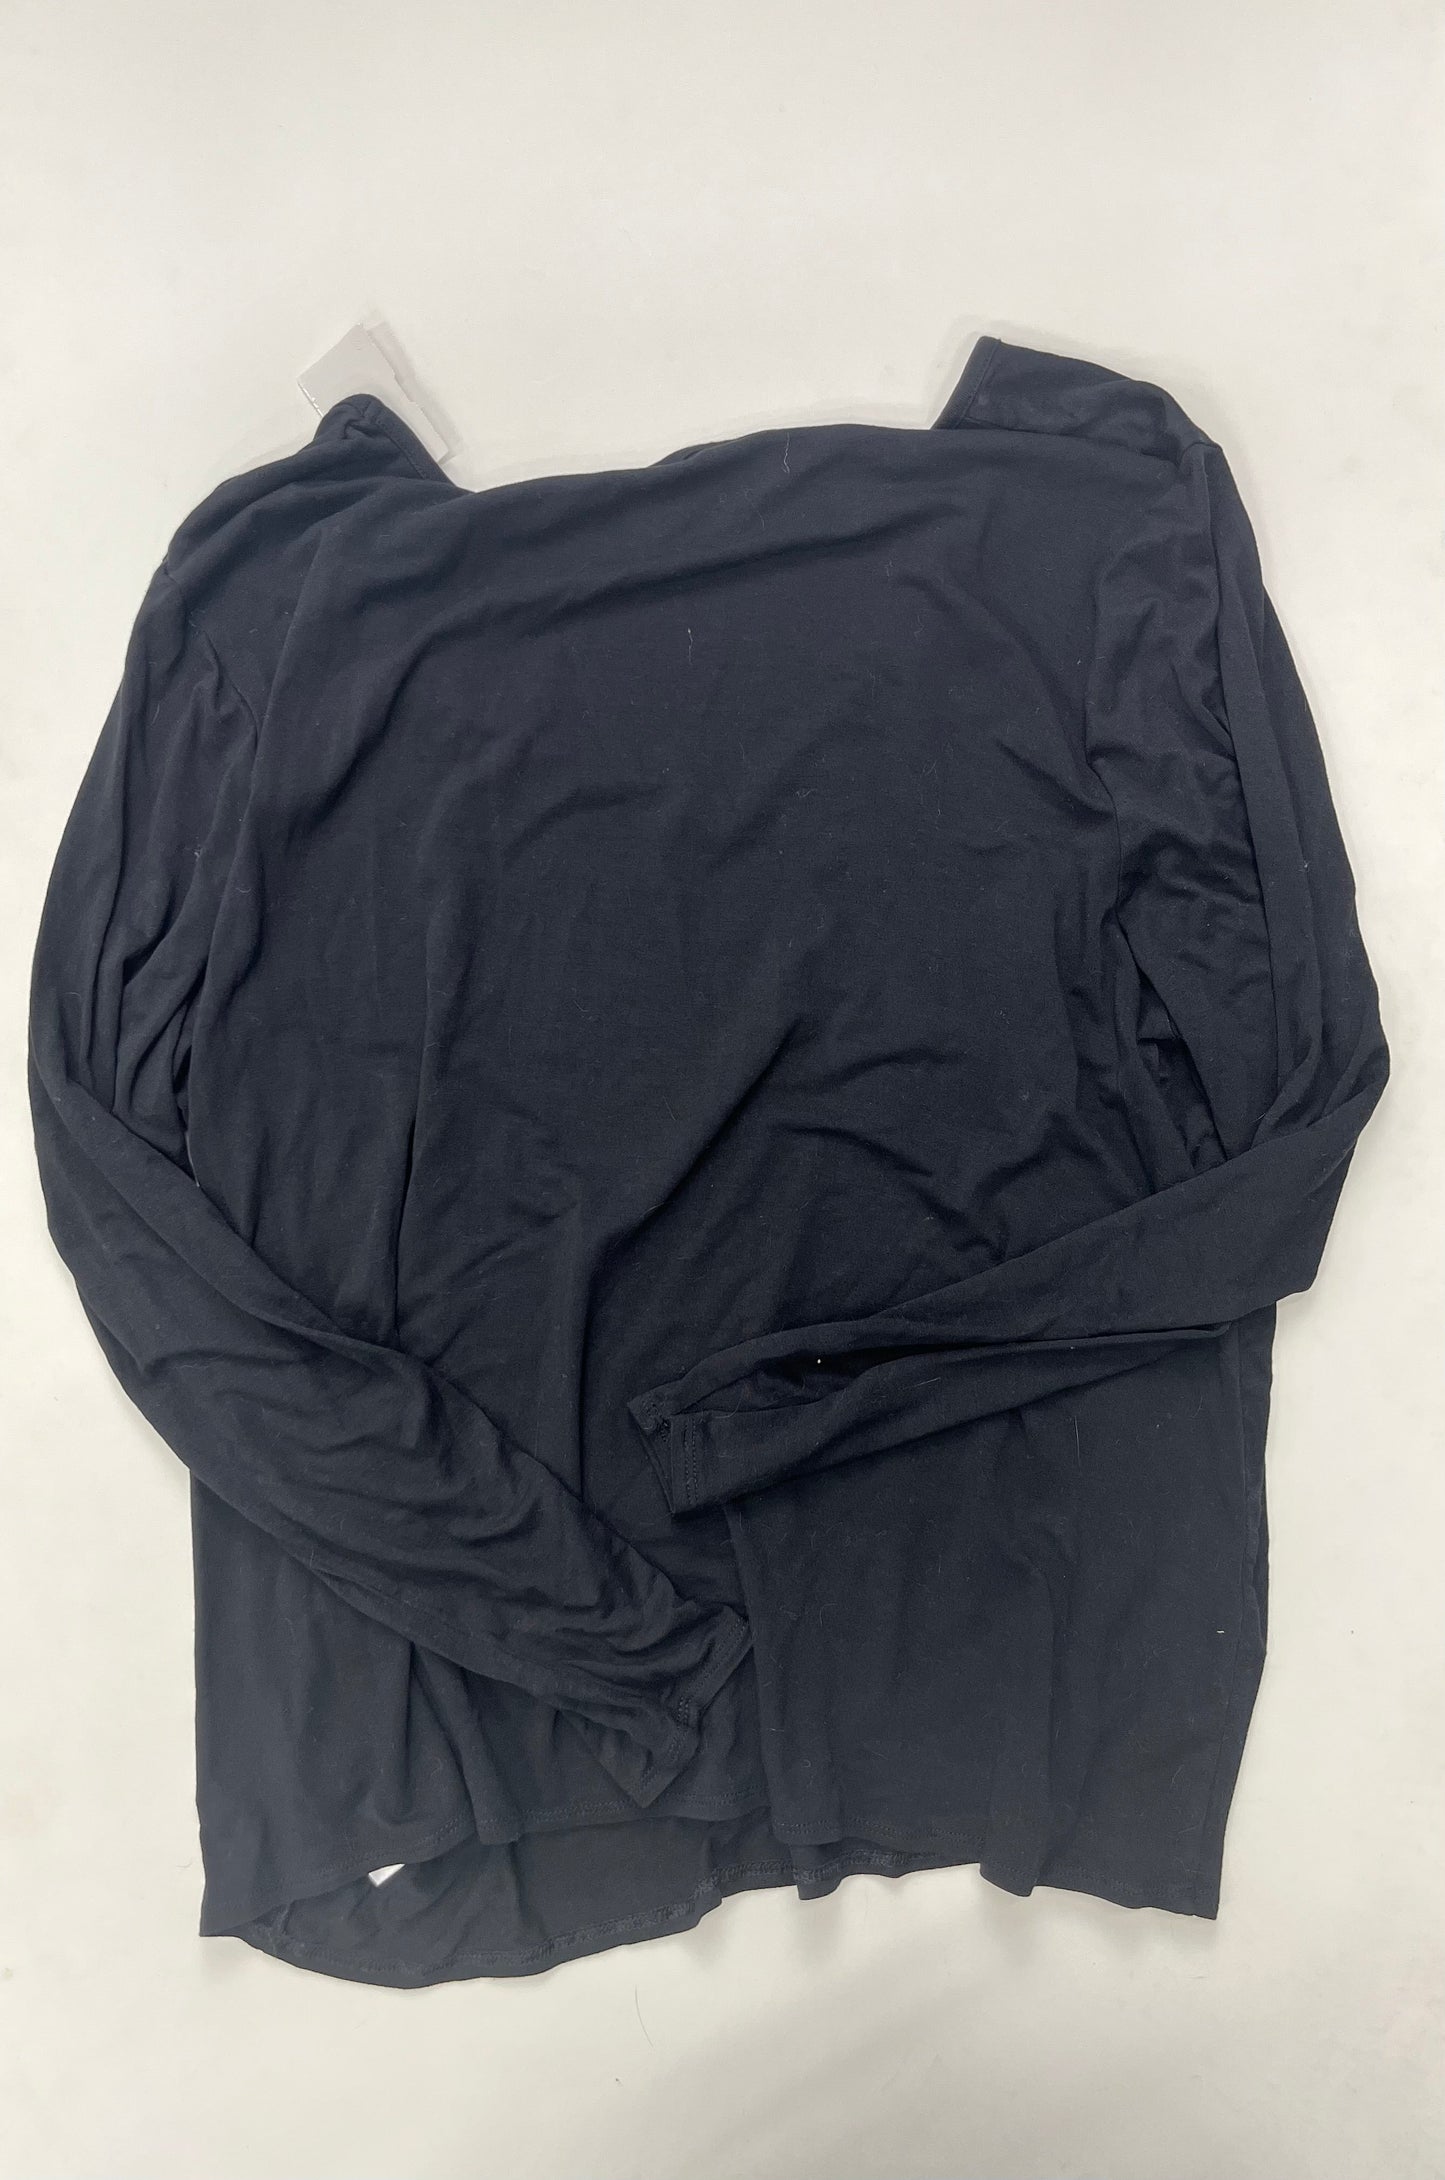 Black Top Long Sleeve Old Navy, Size Xl